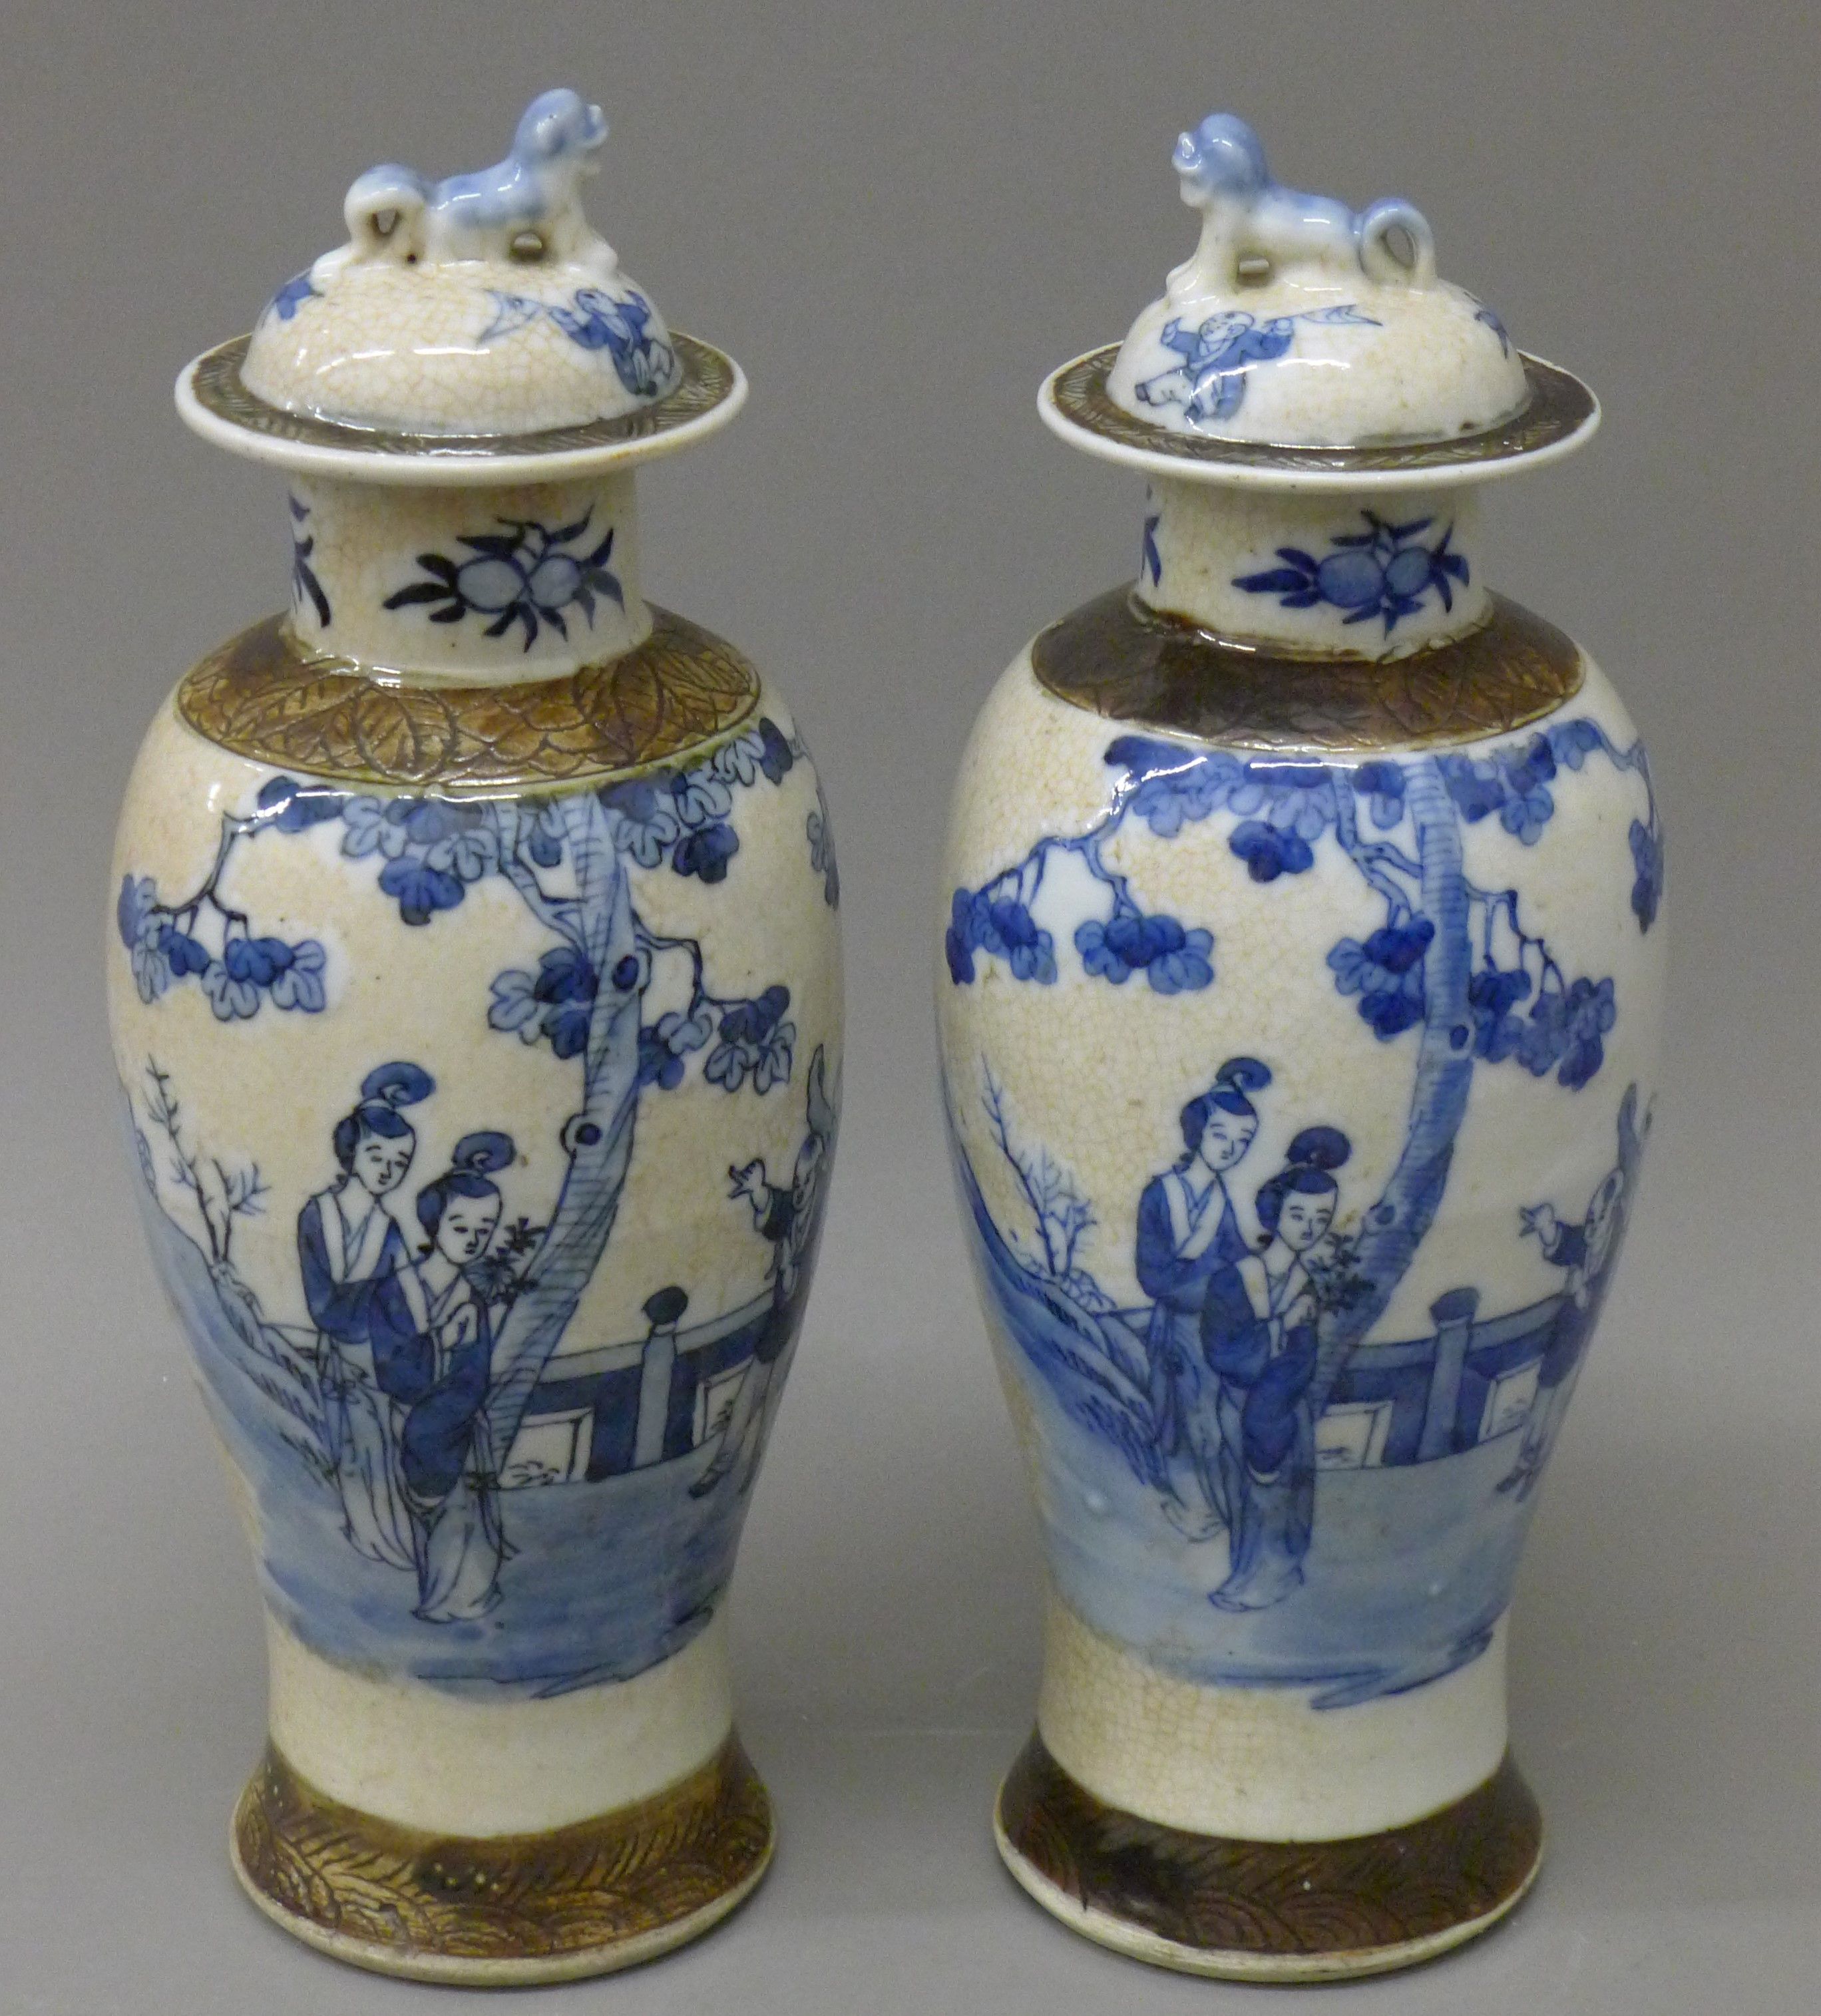 A pair of 19th century Chinese blue and white baluster vases and covers decorated with figures, etc.